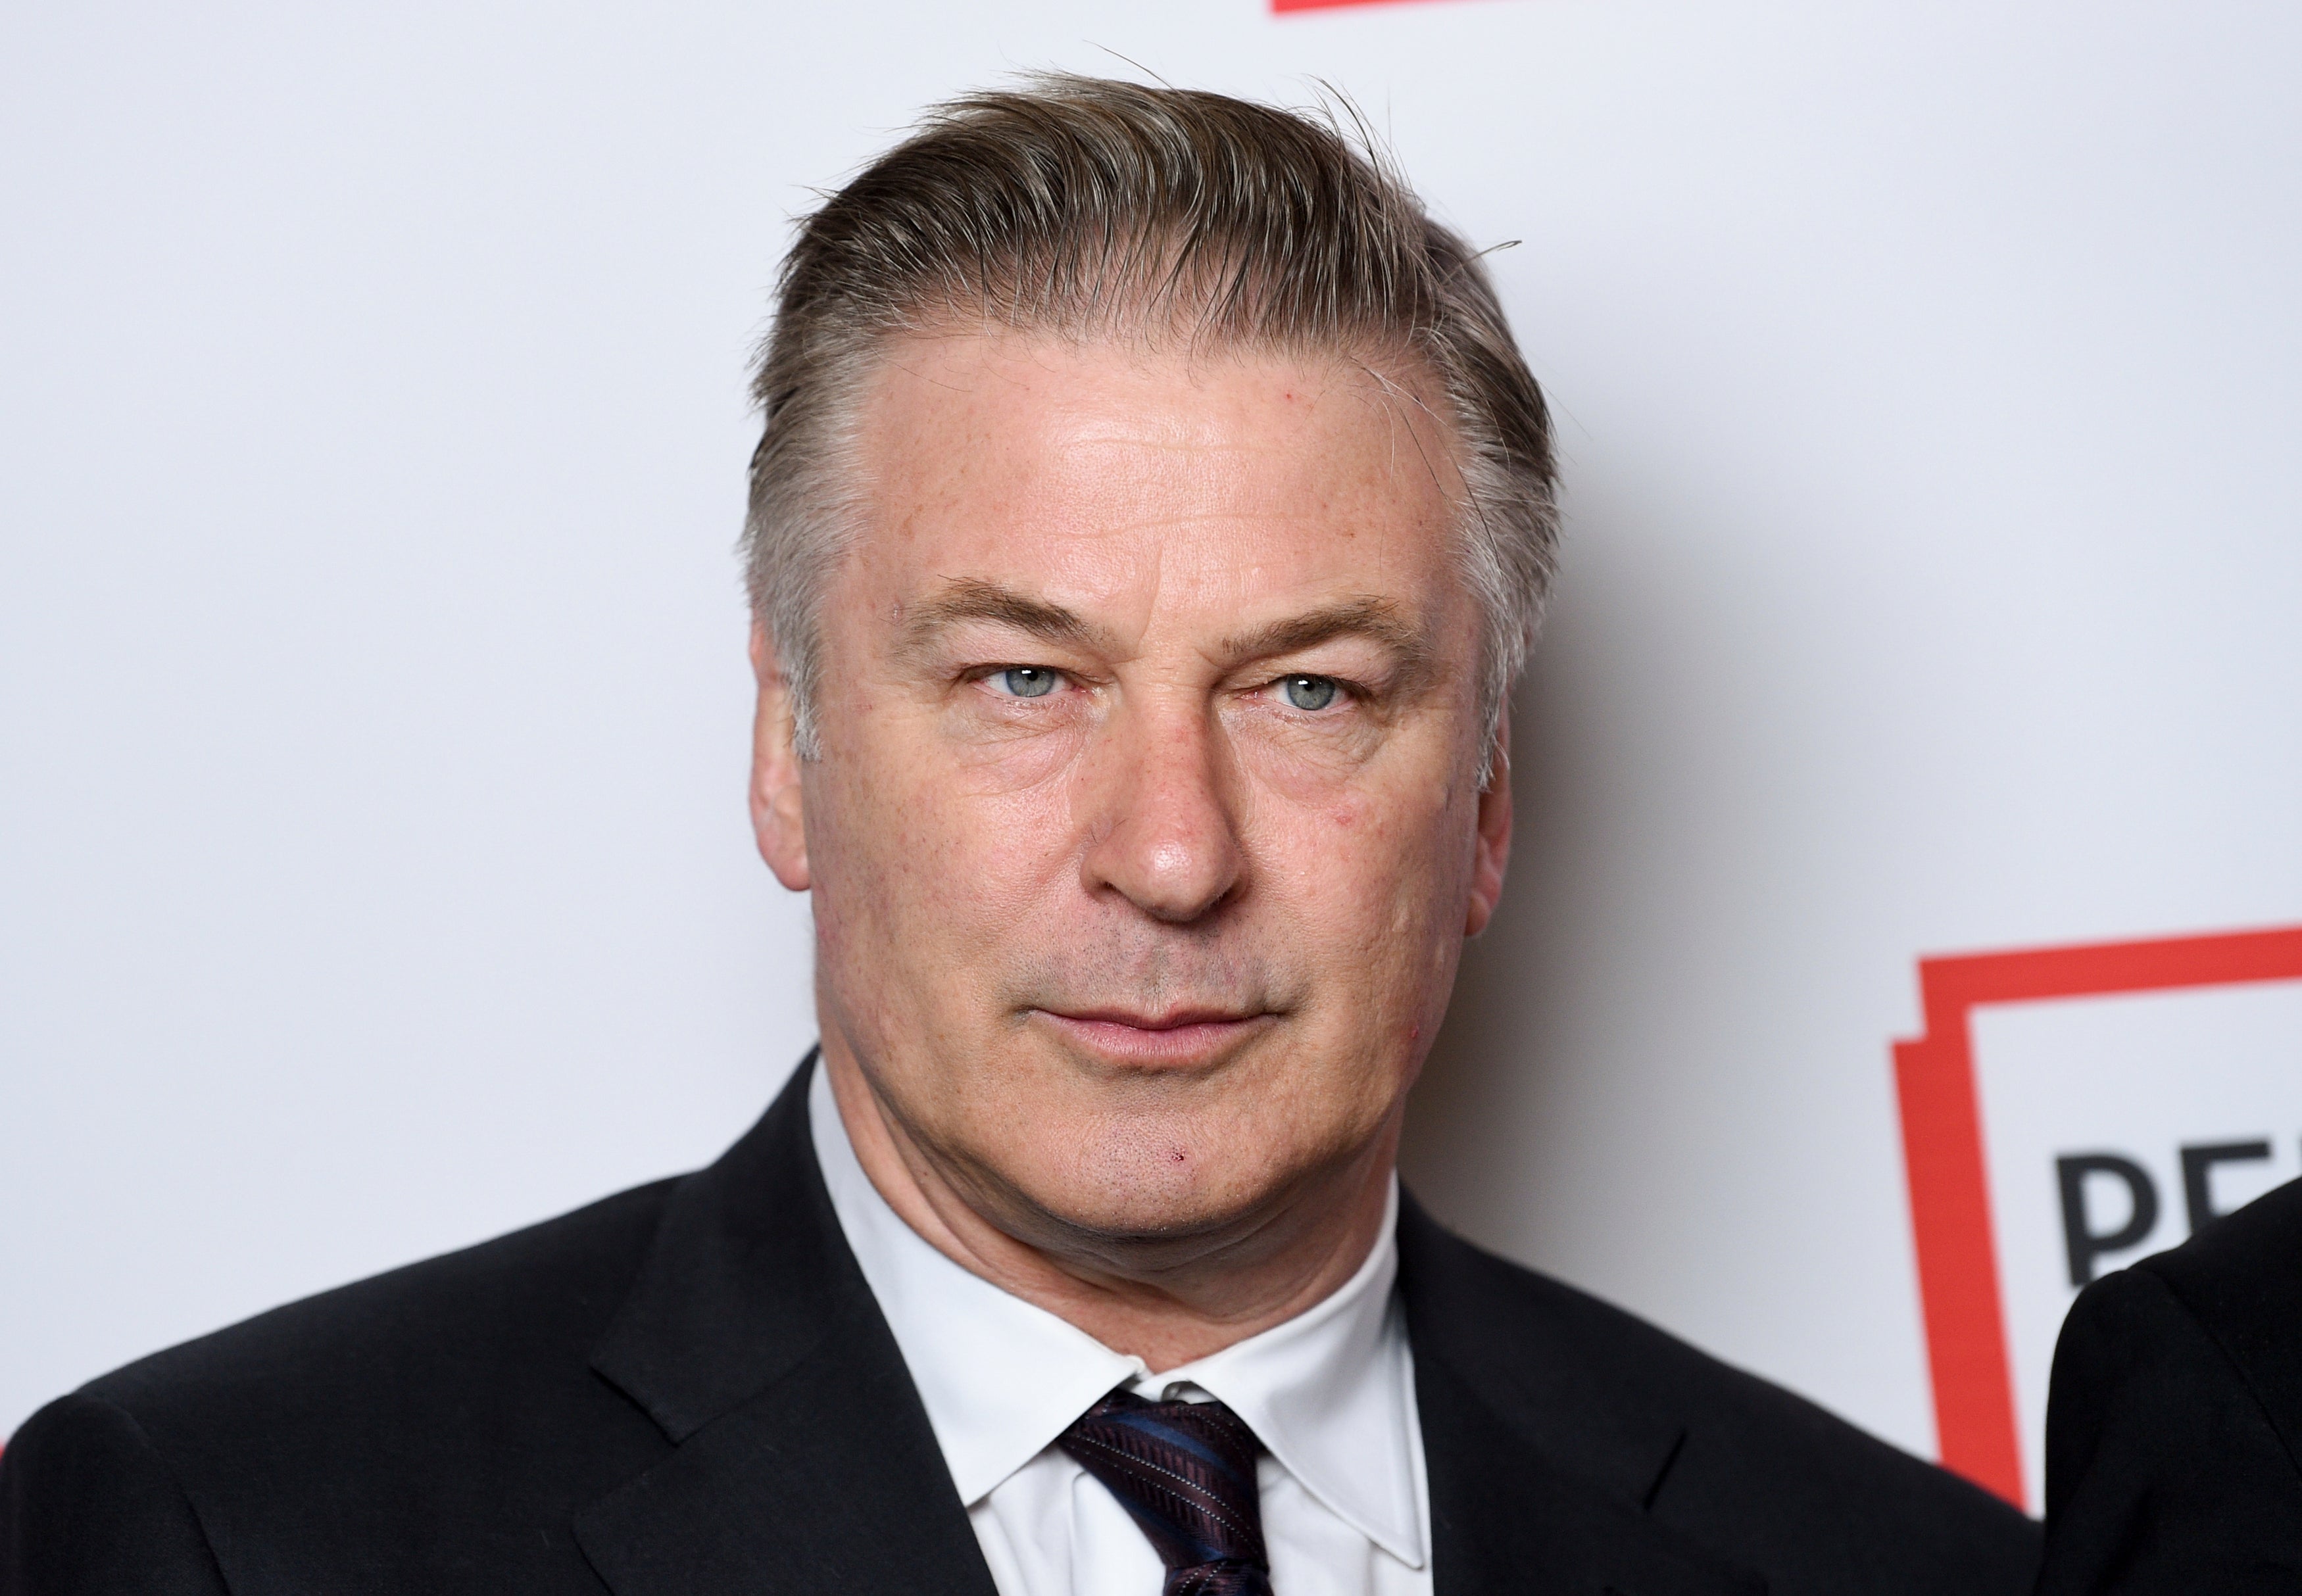 Alec Baldwin broke down in tears in the first interview since the fatal shooting of Halyna Hutchins on the set of Rust (Evan Agostini/AP)